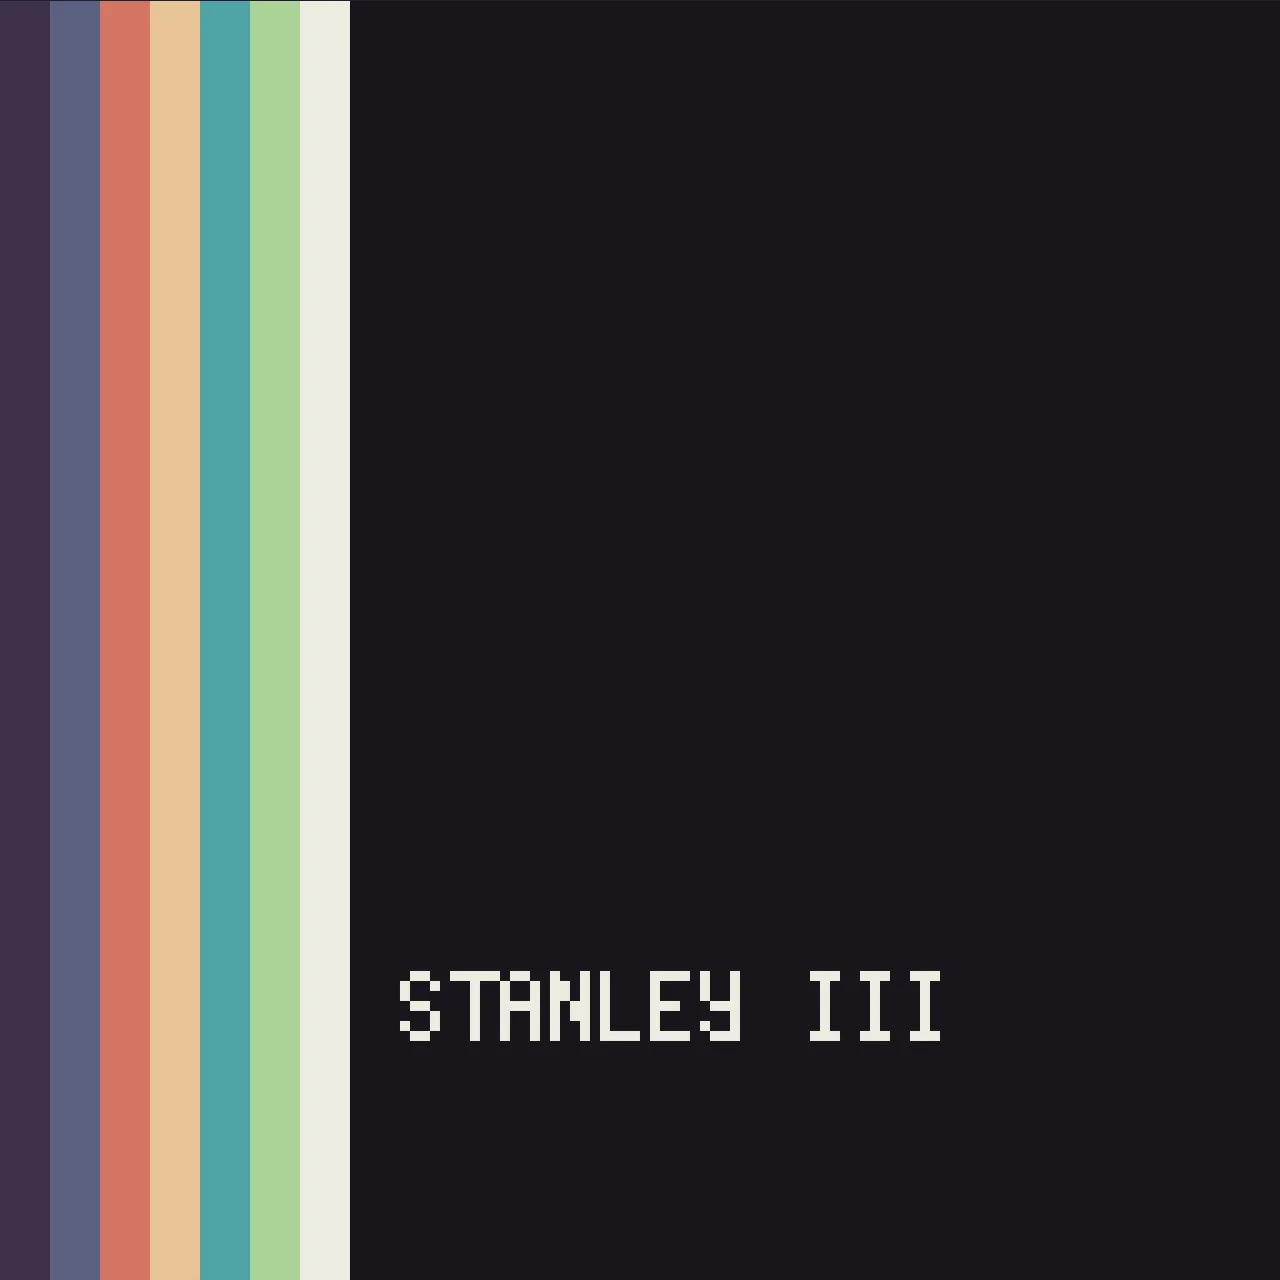 A screenshot of the Stanley's boot screen, displaying a sort of logo made of rainbow stripes and the name 'Stanley'.